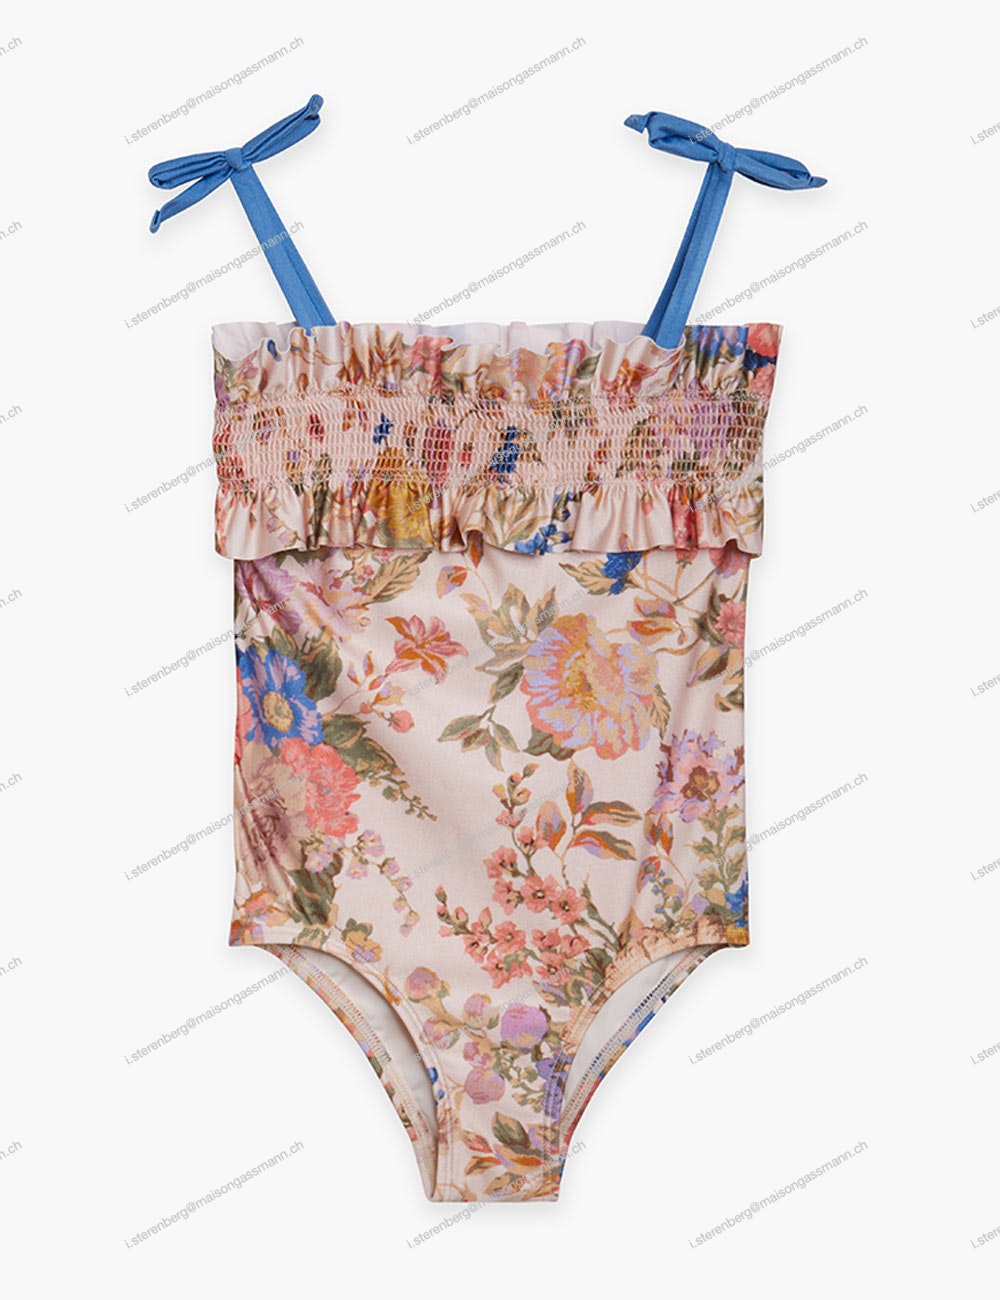 Swimsuit with flowers